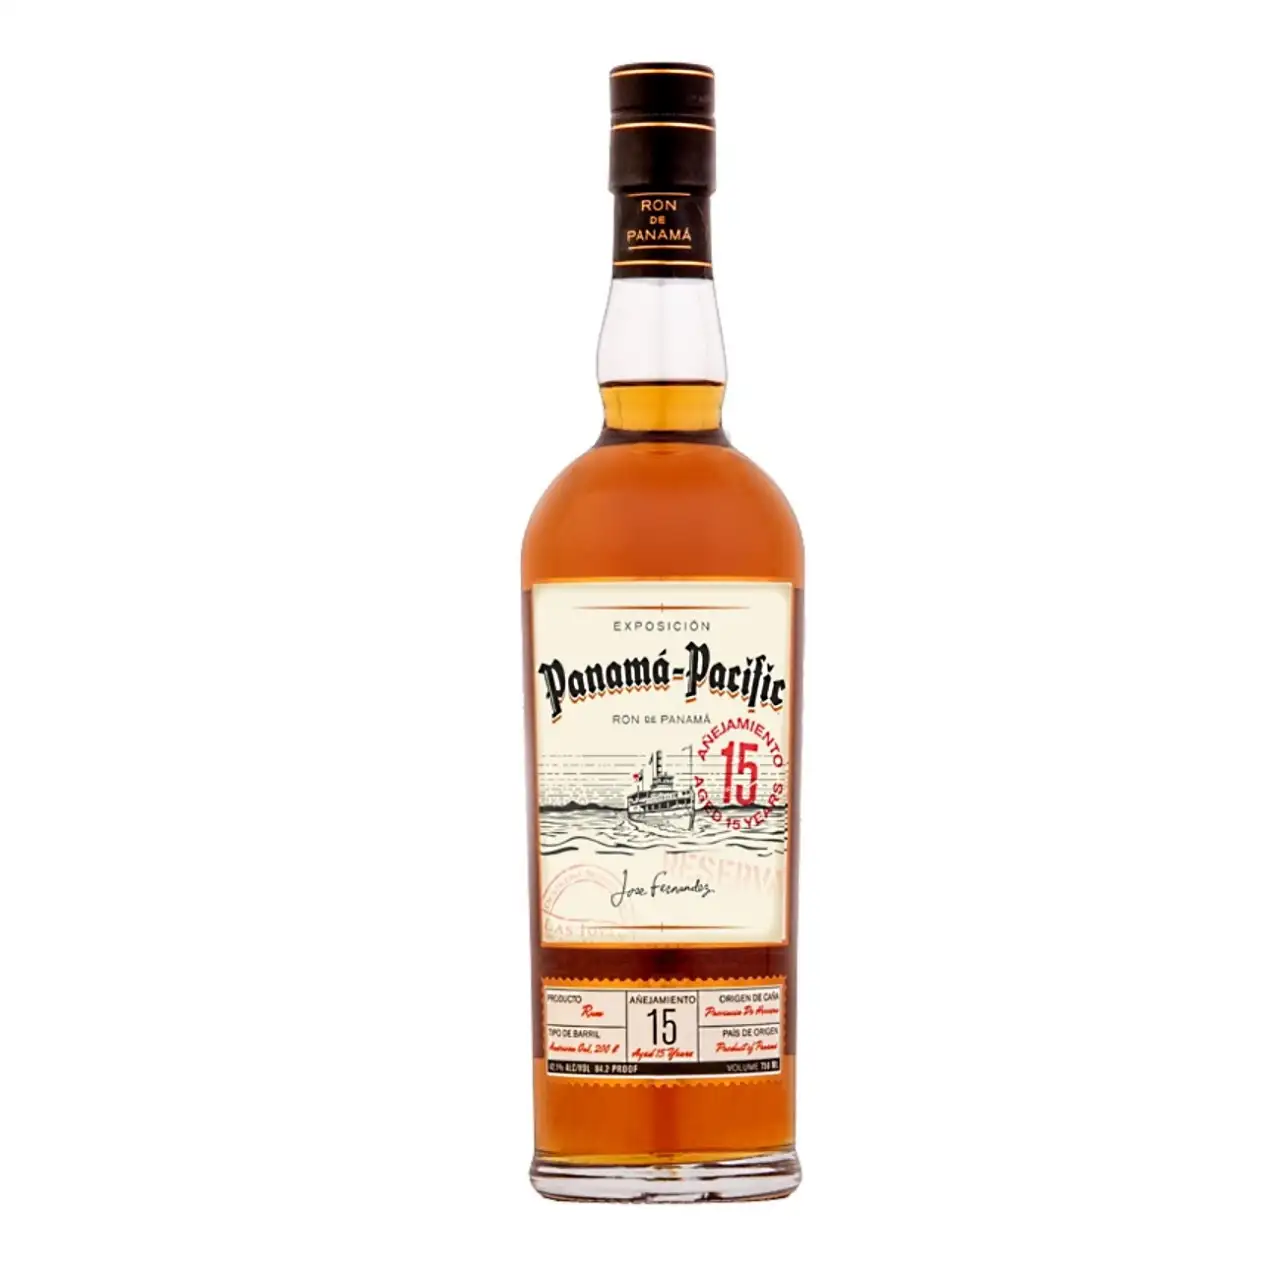 Image of the front of the bottle of the rum Panama-Pacific Aged 15 Years